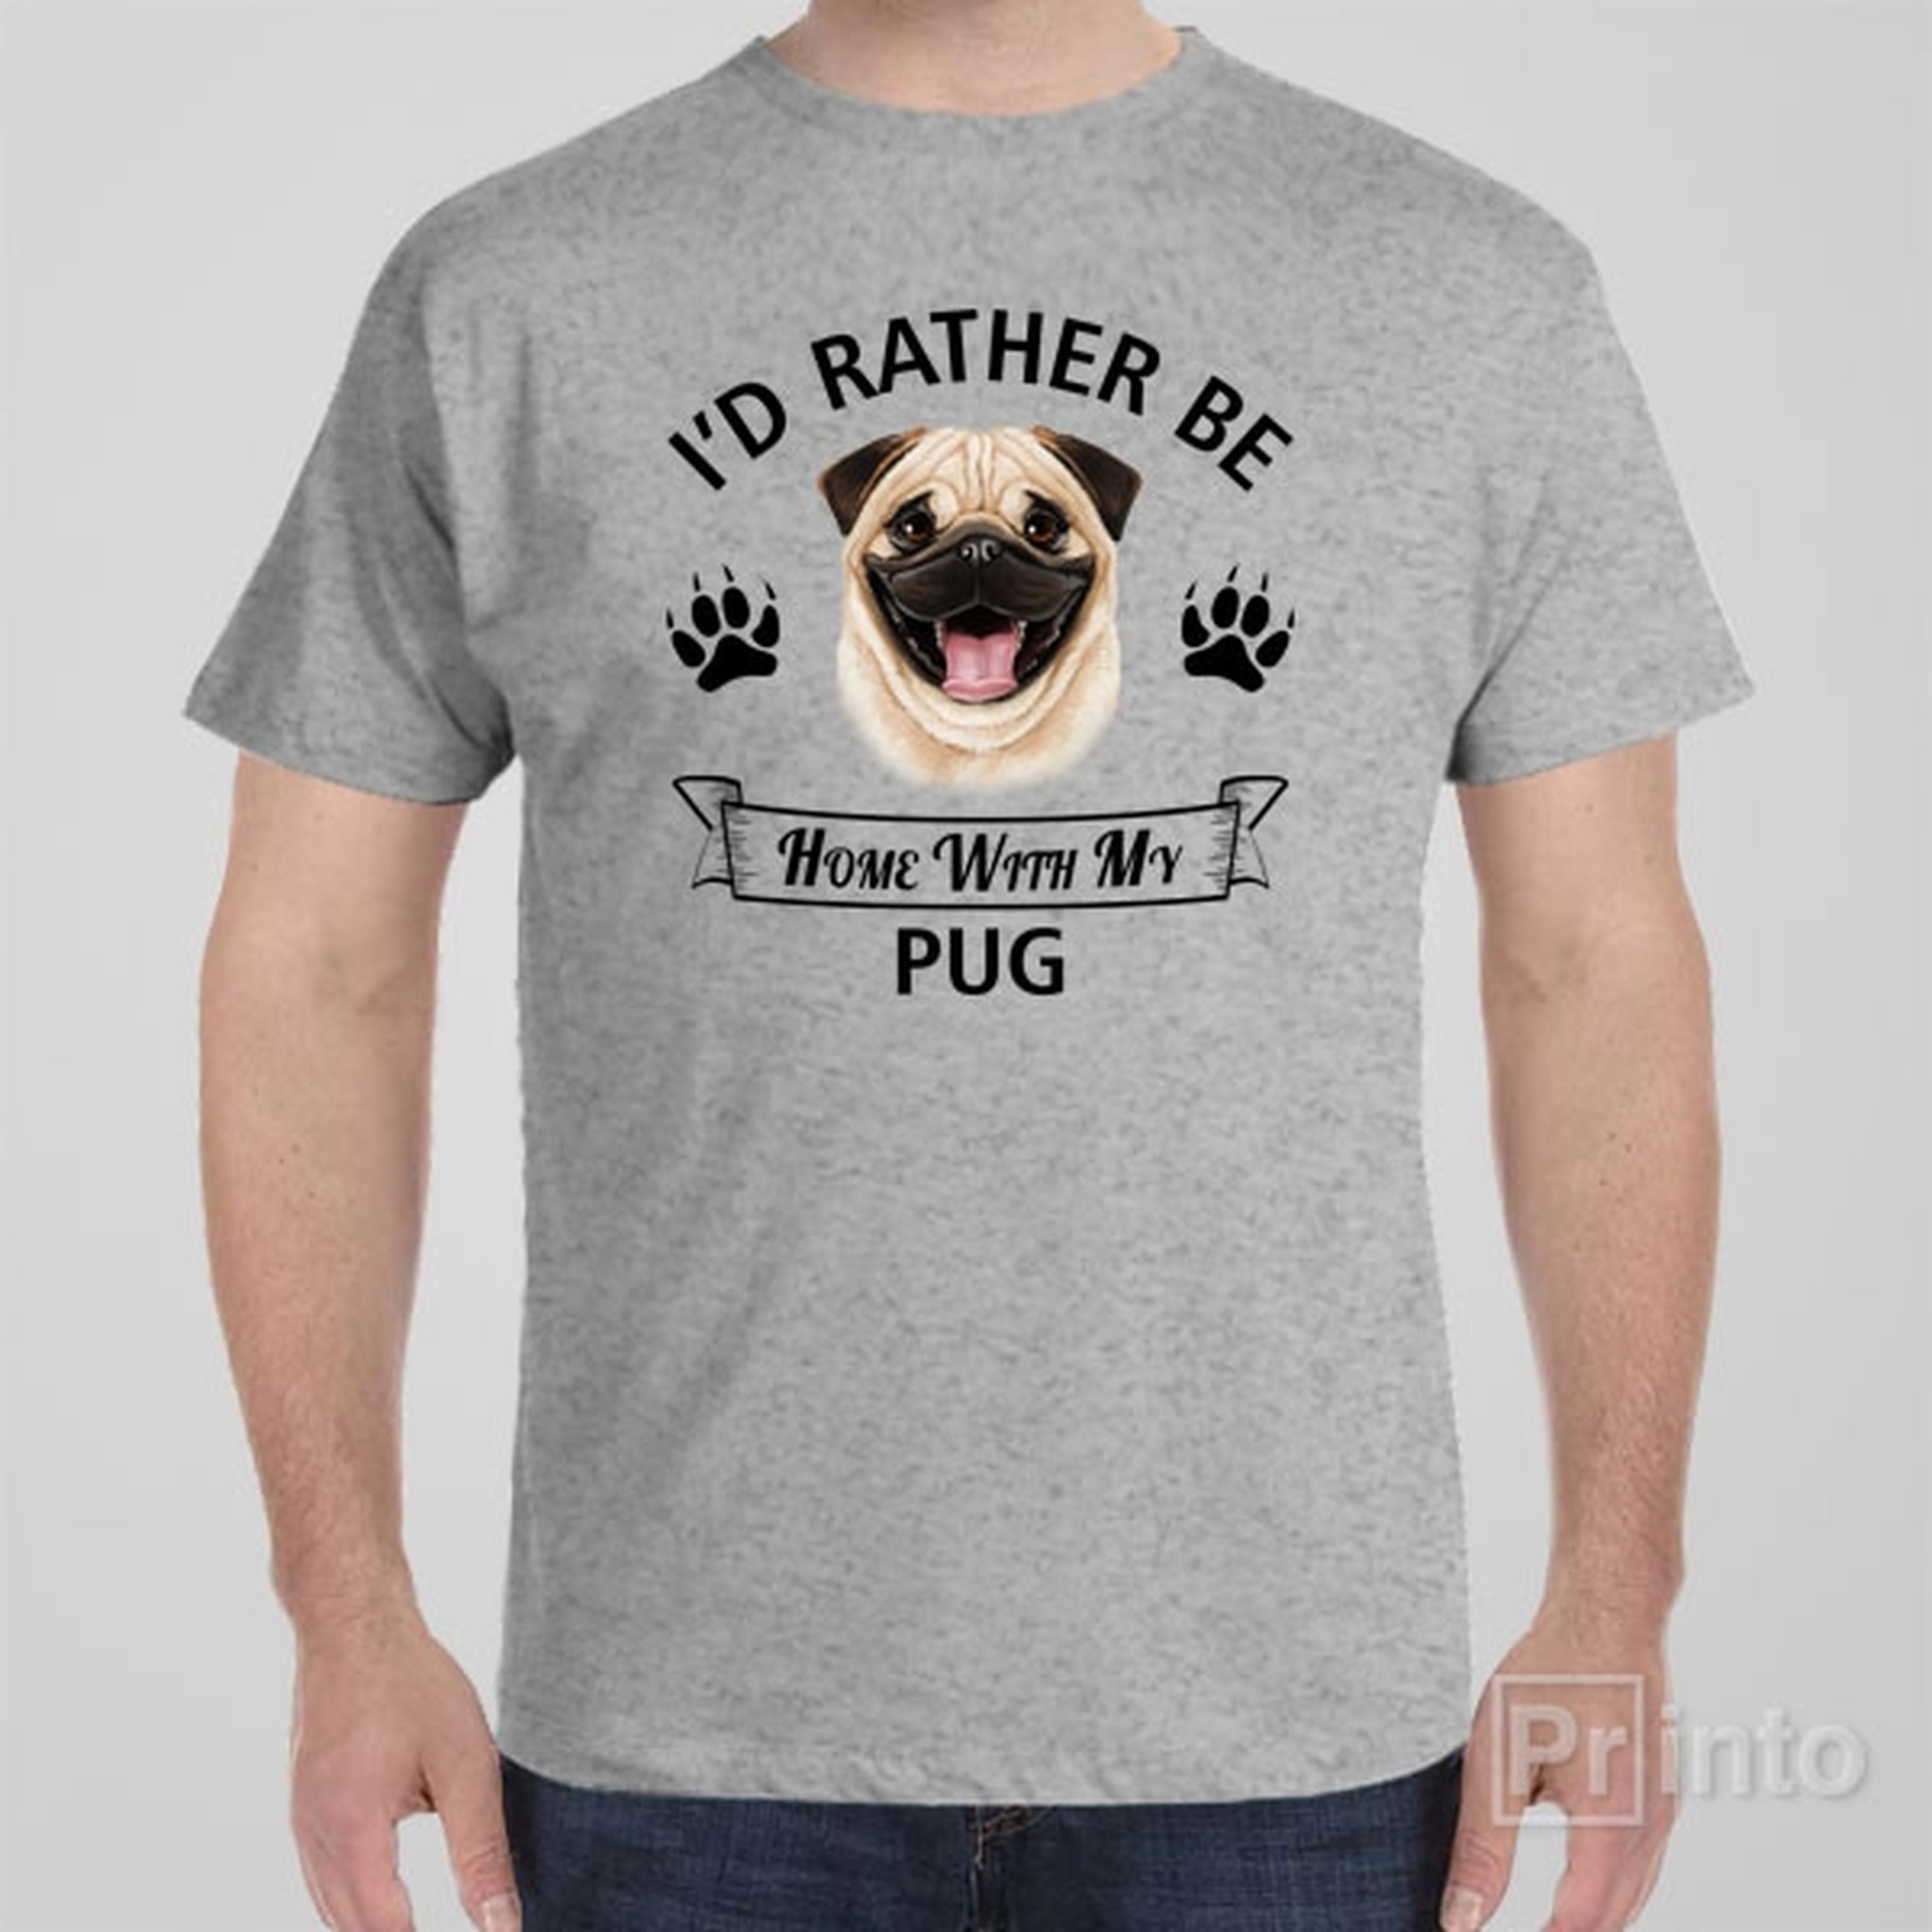 id-rather-stay-home-with-my-pug-t-shirt